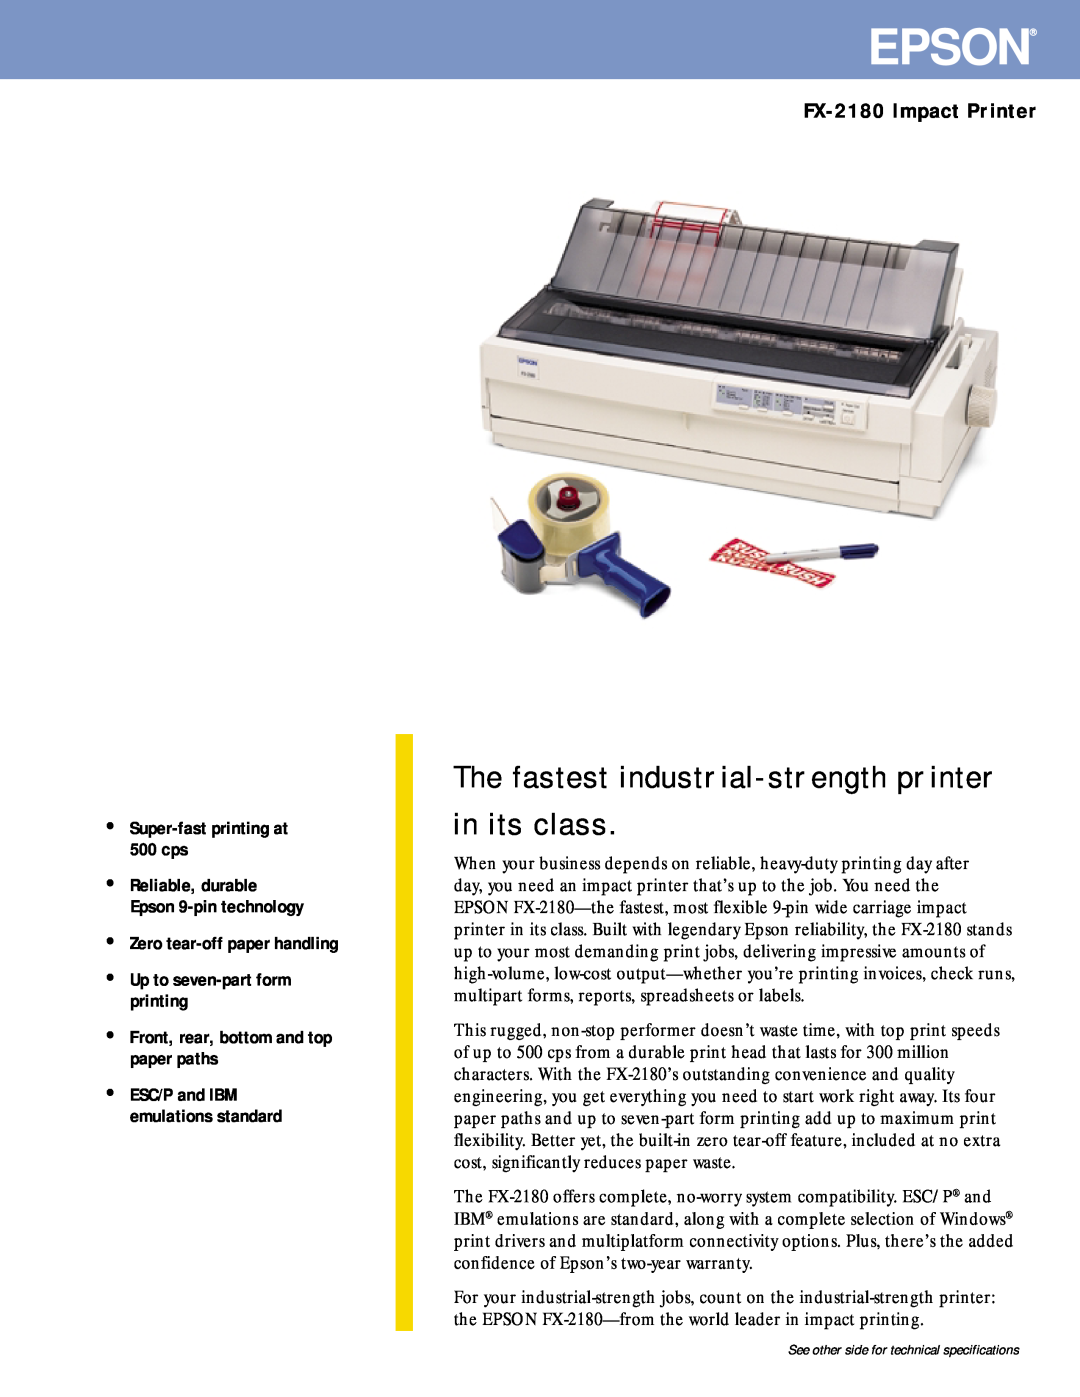 Epson technical specifications FX-2180 Impact Printer, Epson, The fastest industrial-strength printer in its class 